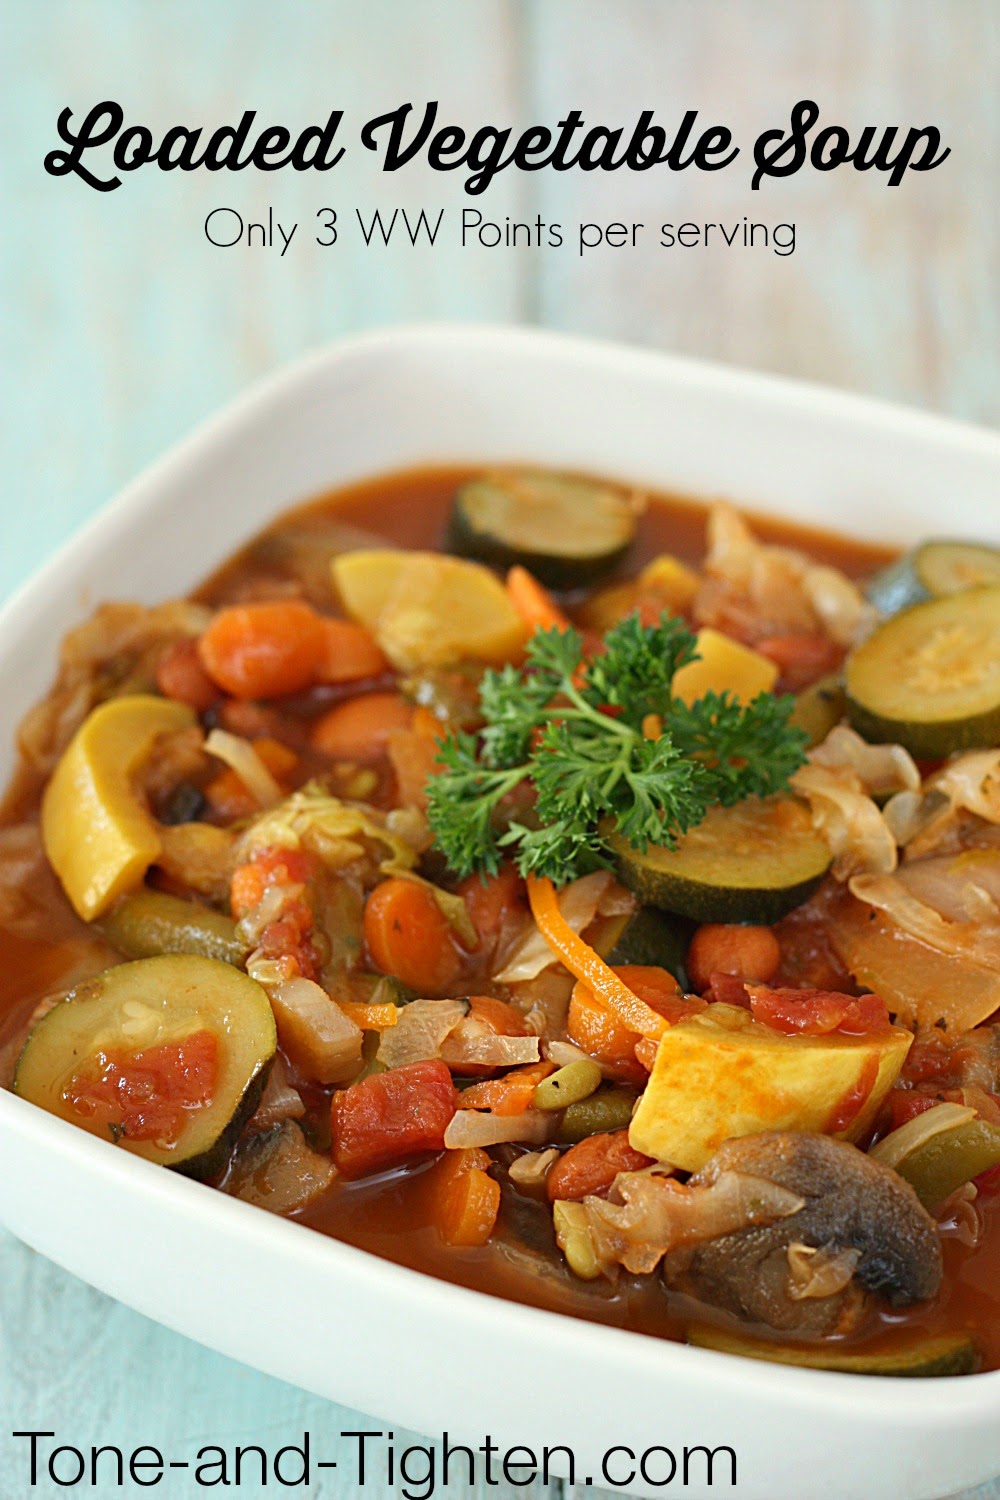 Weight Watchers’ Loaded Vegetable Soup Recipe (full of protein and fiber)